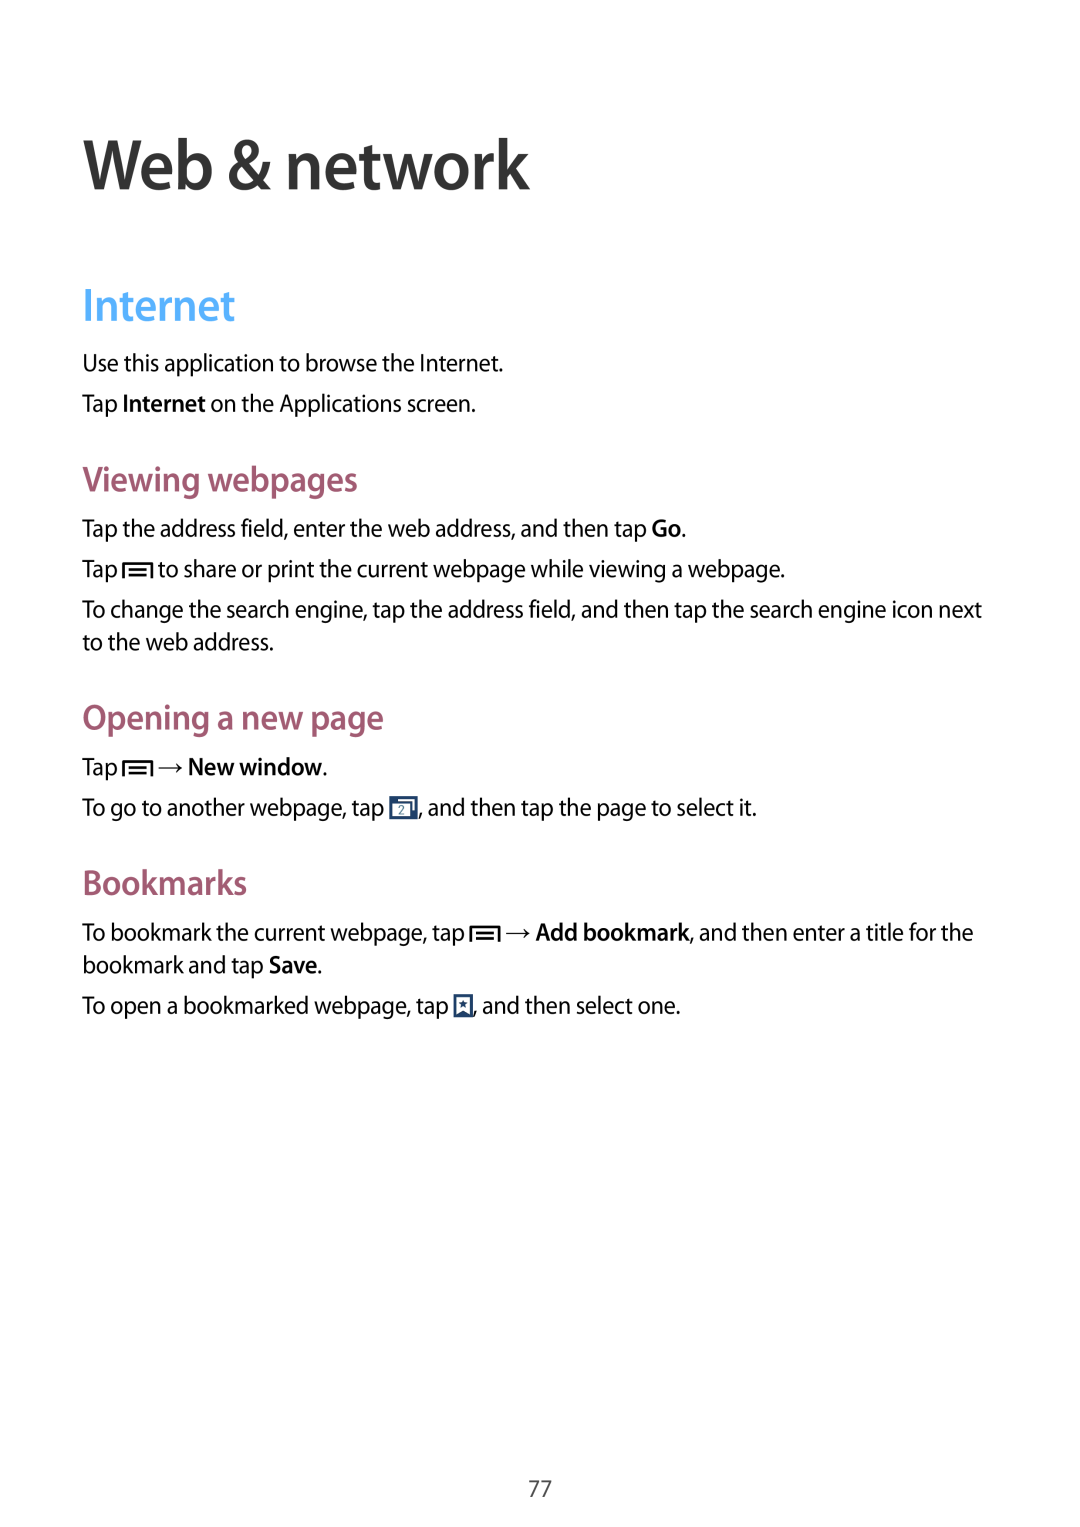 Samsung SM-N9005BDEKSA manual Web & network, Internet, Viewing webpages, Opening a new page, Bookmarks, Tap →New window 